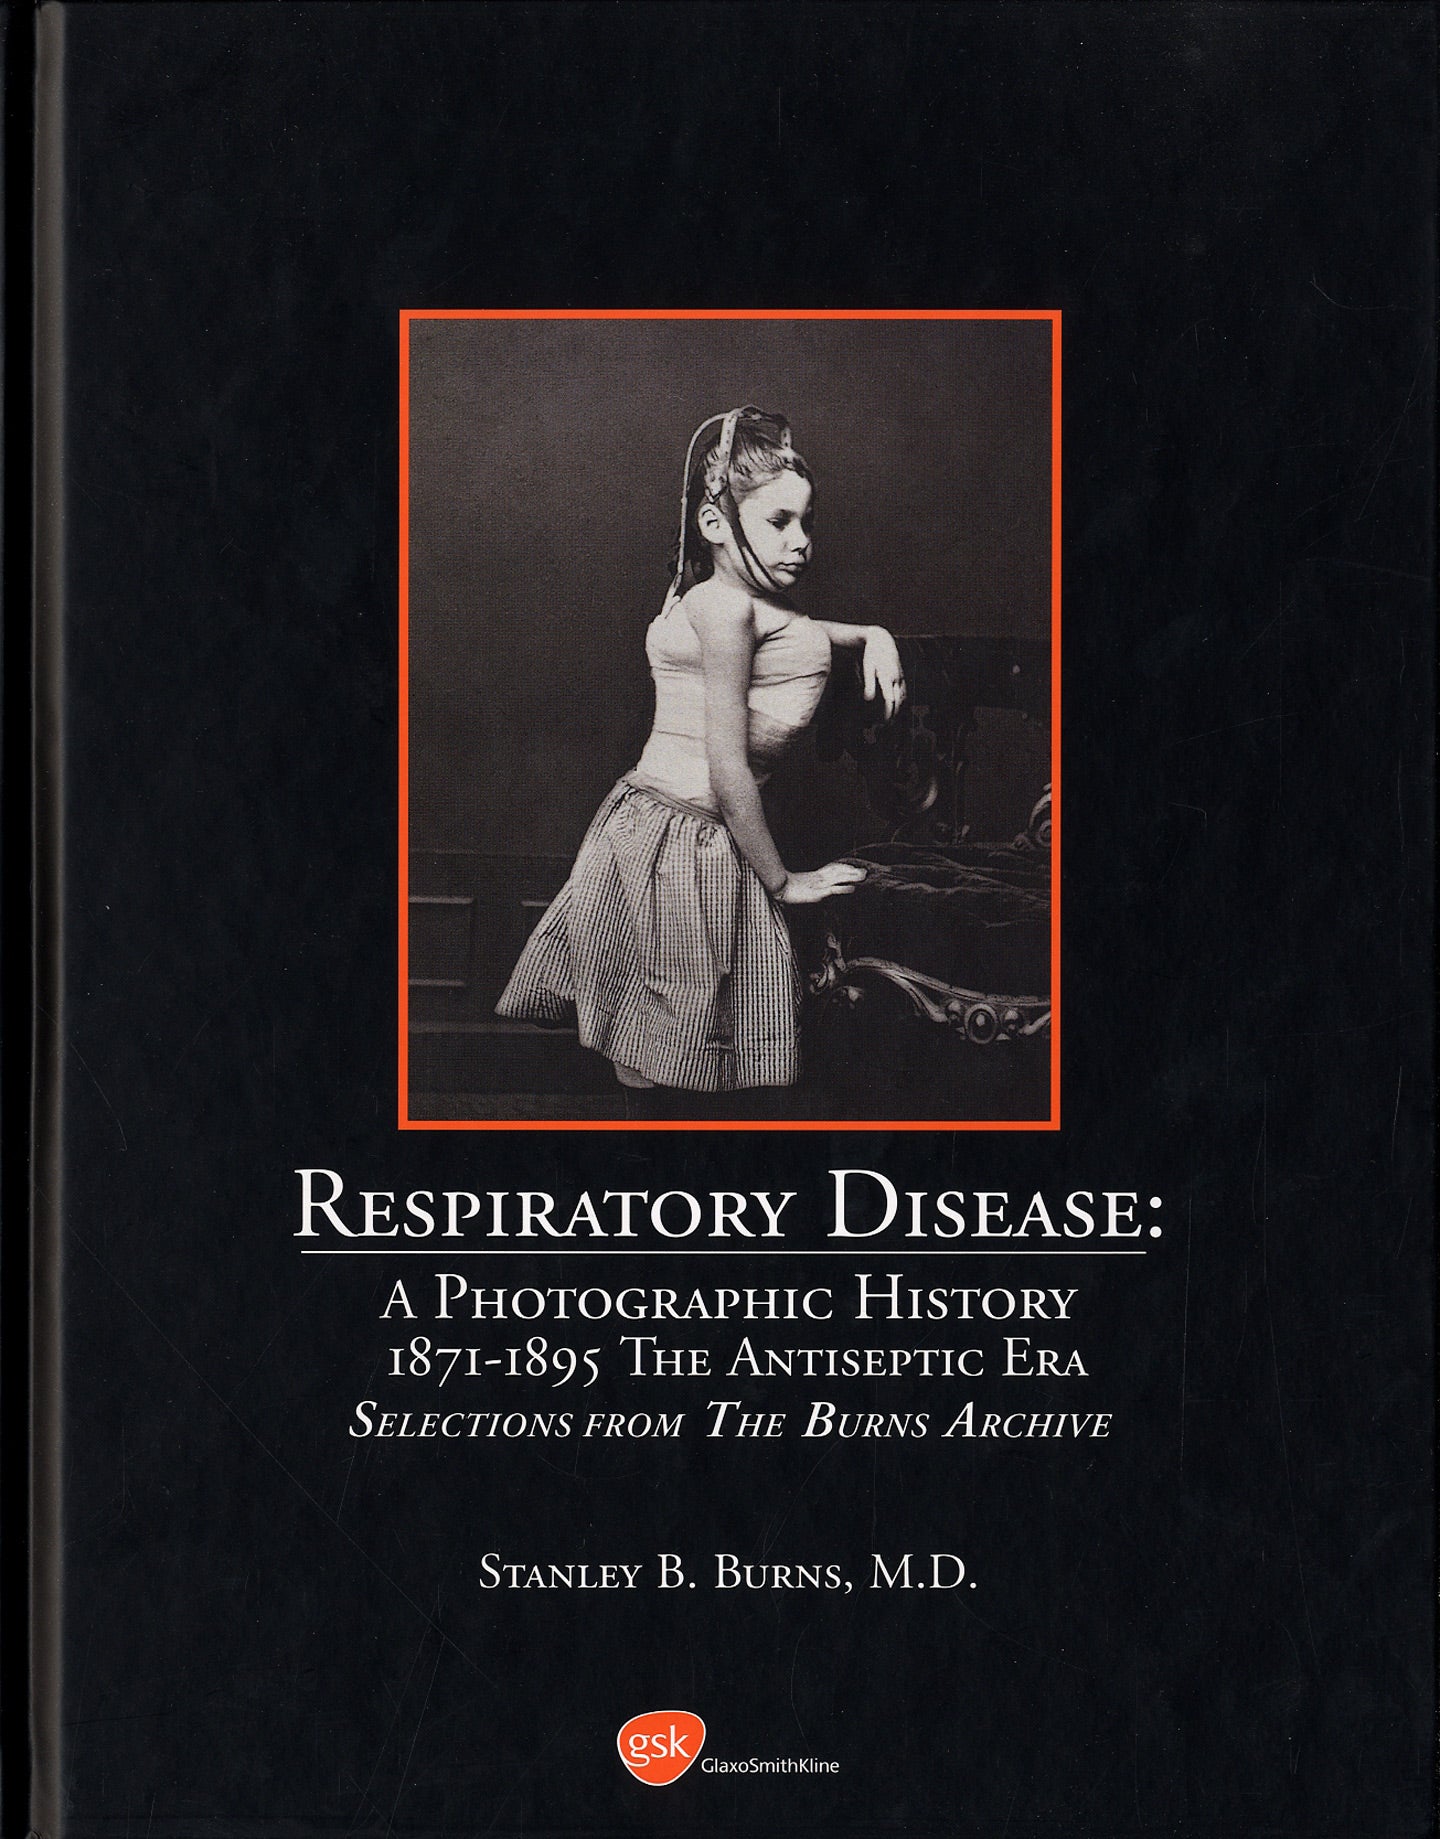 Burns Archive: Respiratory Disease: A Photographic History, 1845-1945, Selections form the Burns Archive, Special Cased Limited Edition Set of Four Books (First Edition) [SIGNED]